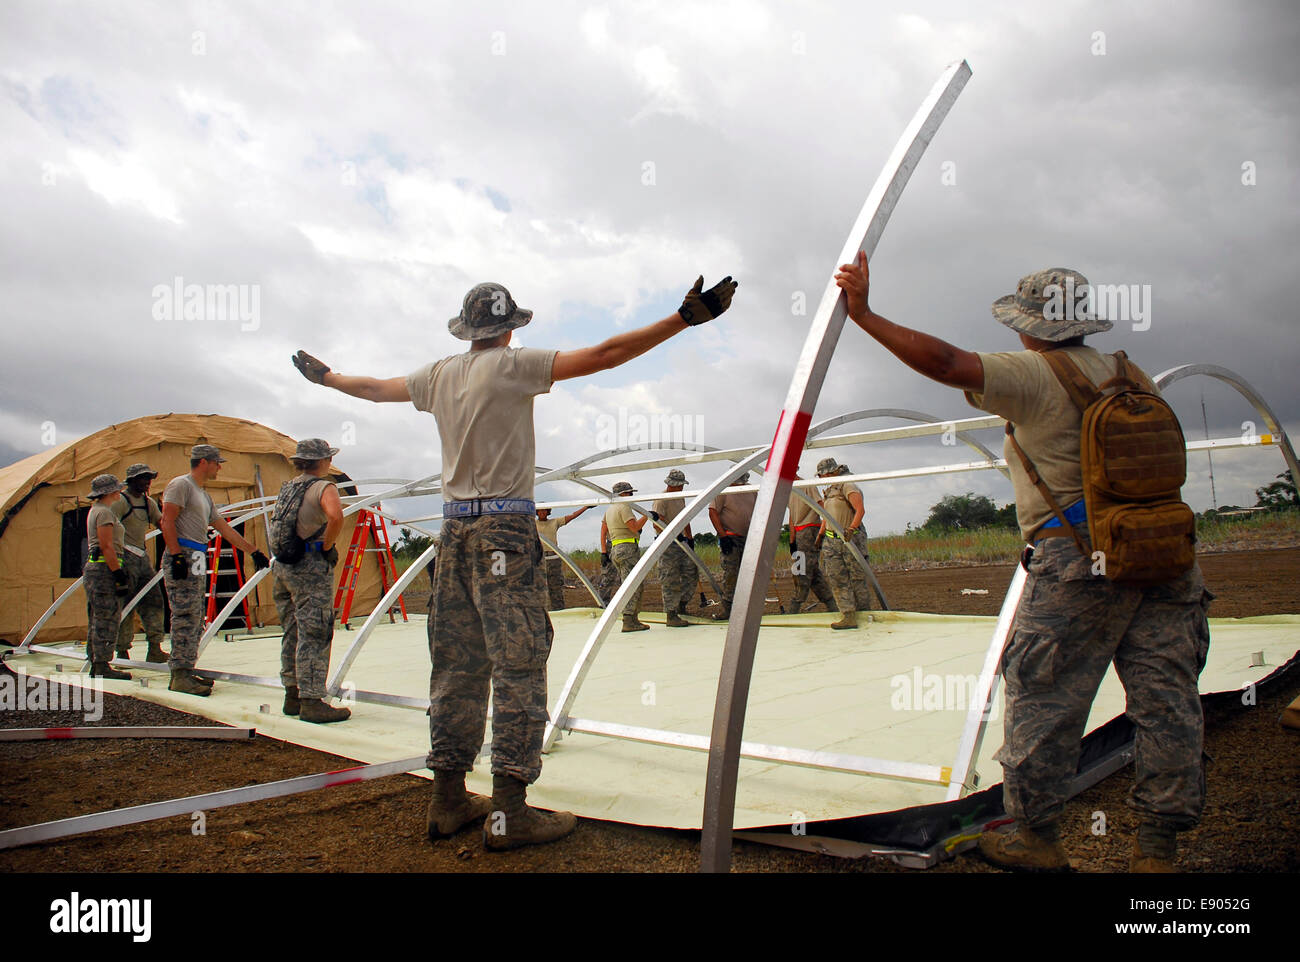 US Air Force airmen work to assemble a portable hospital October 9, 2014 in Monrovia, Liberia. The American troops will assist in the building of Ebola treatment units in the harder to reach areas of Liberia in an effort to contain the Ebola virus outbreak in West African nations. Stock Photo